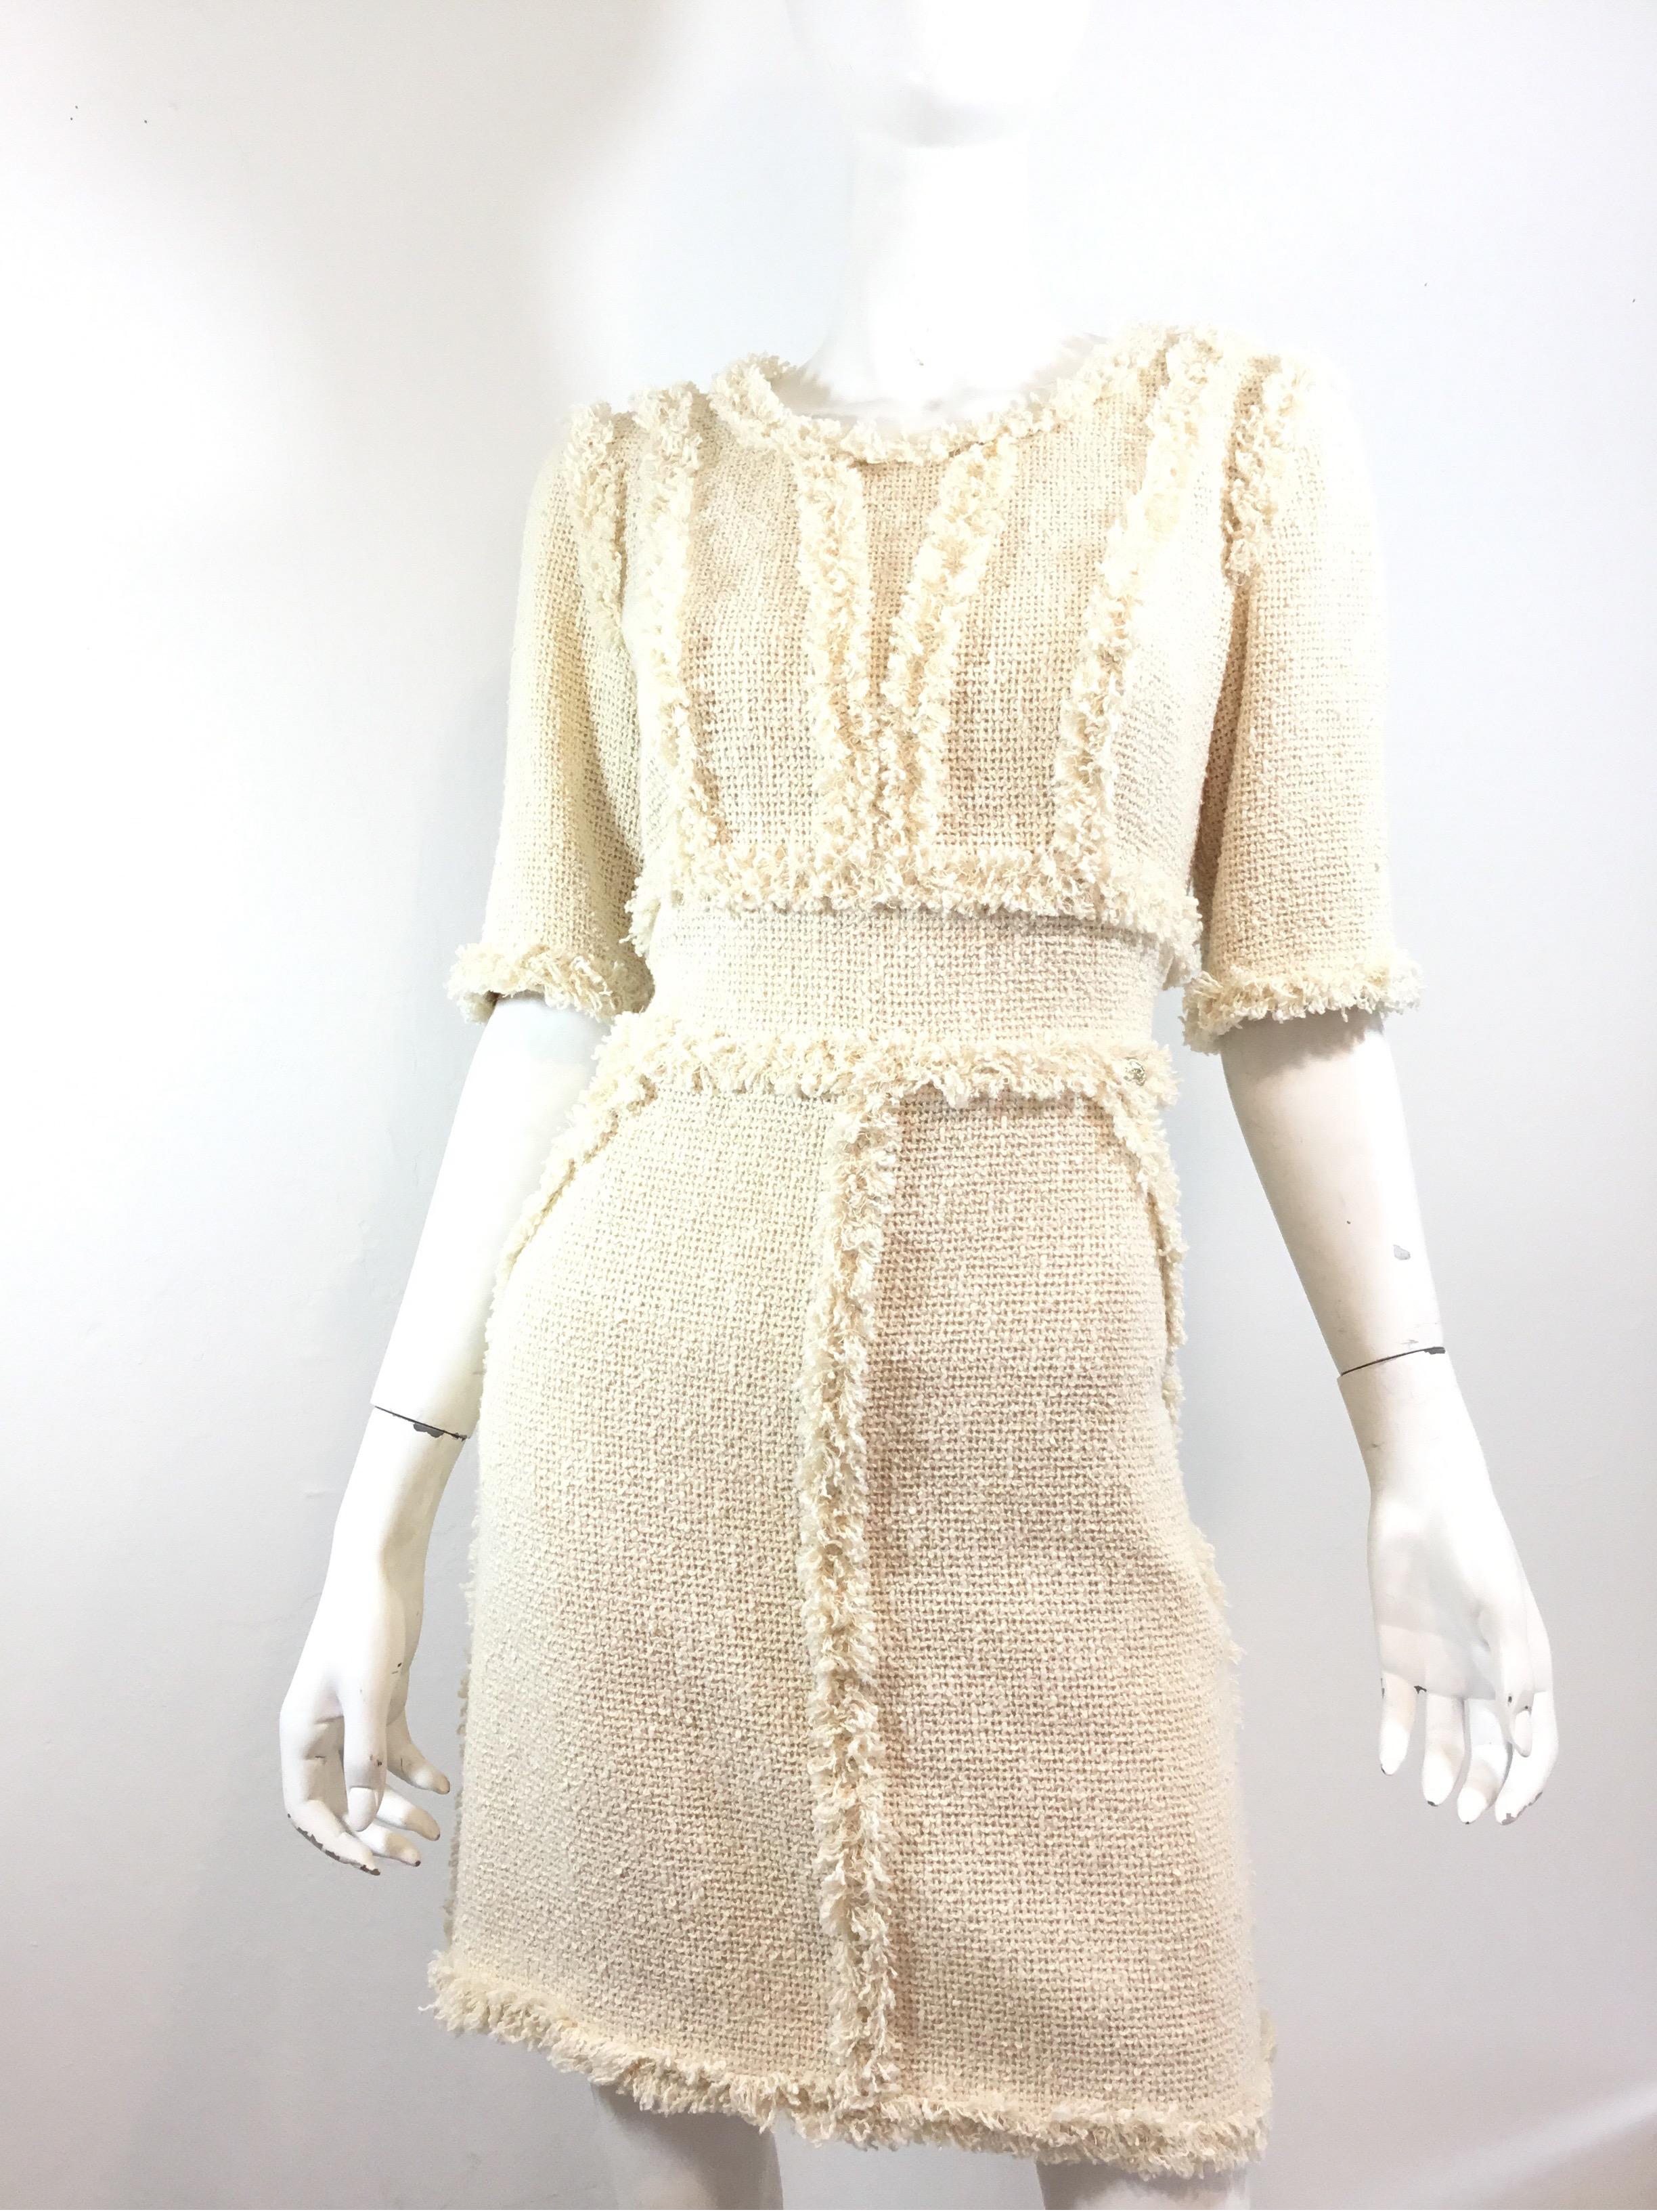 Chanel Tweed Dress featured in a Cream/ivory color with fringed trimming. Dress is fully lined in silk, cotton with nylon blend knit with a back zipper fastening, and is a size 42. Made in France.

Bust 36''
Waist 32''
Hips 36''
Length 35''
Sleeves